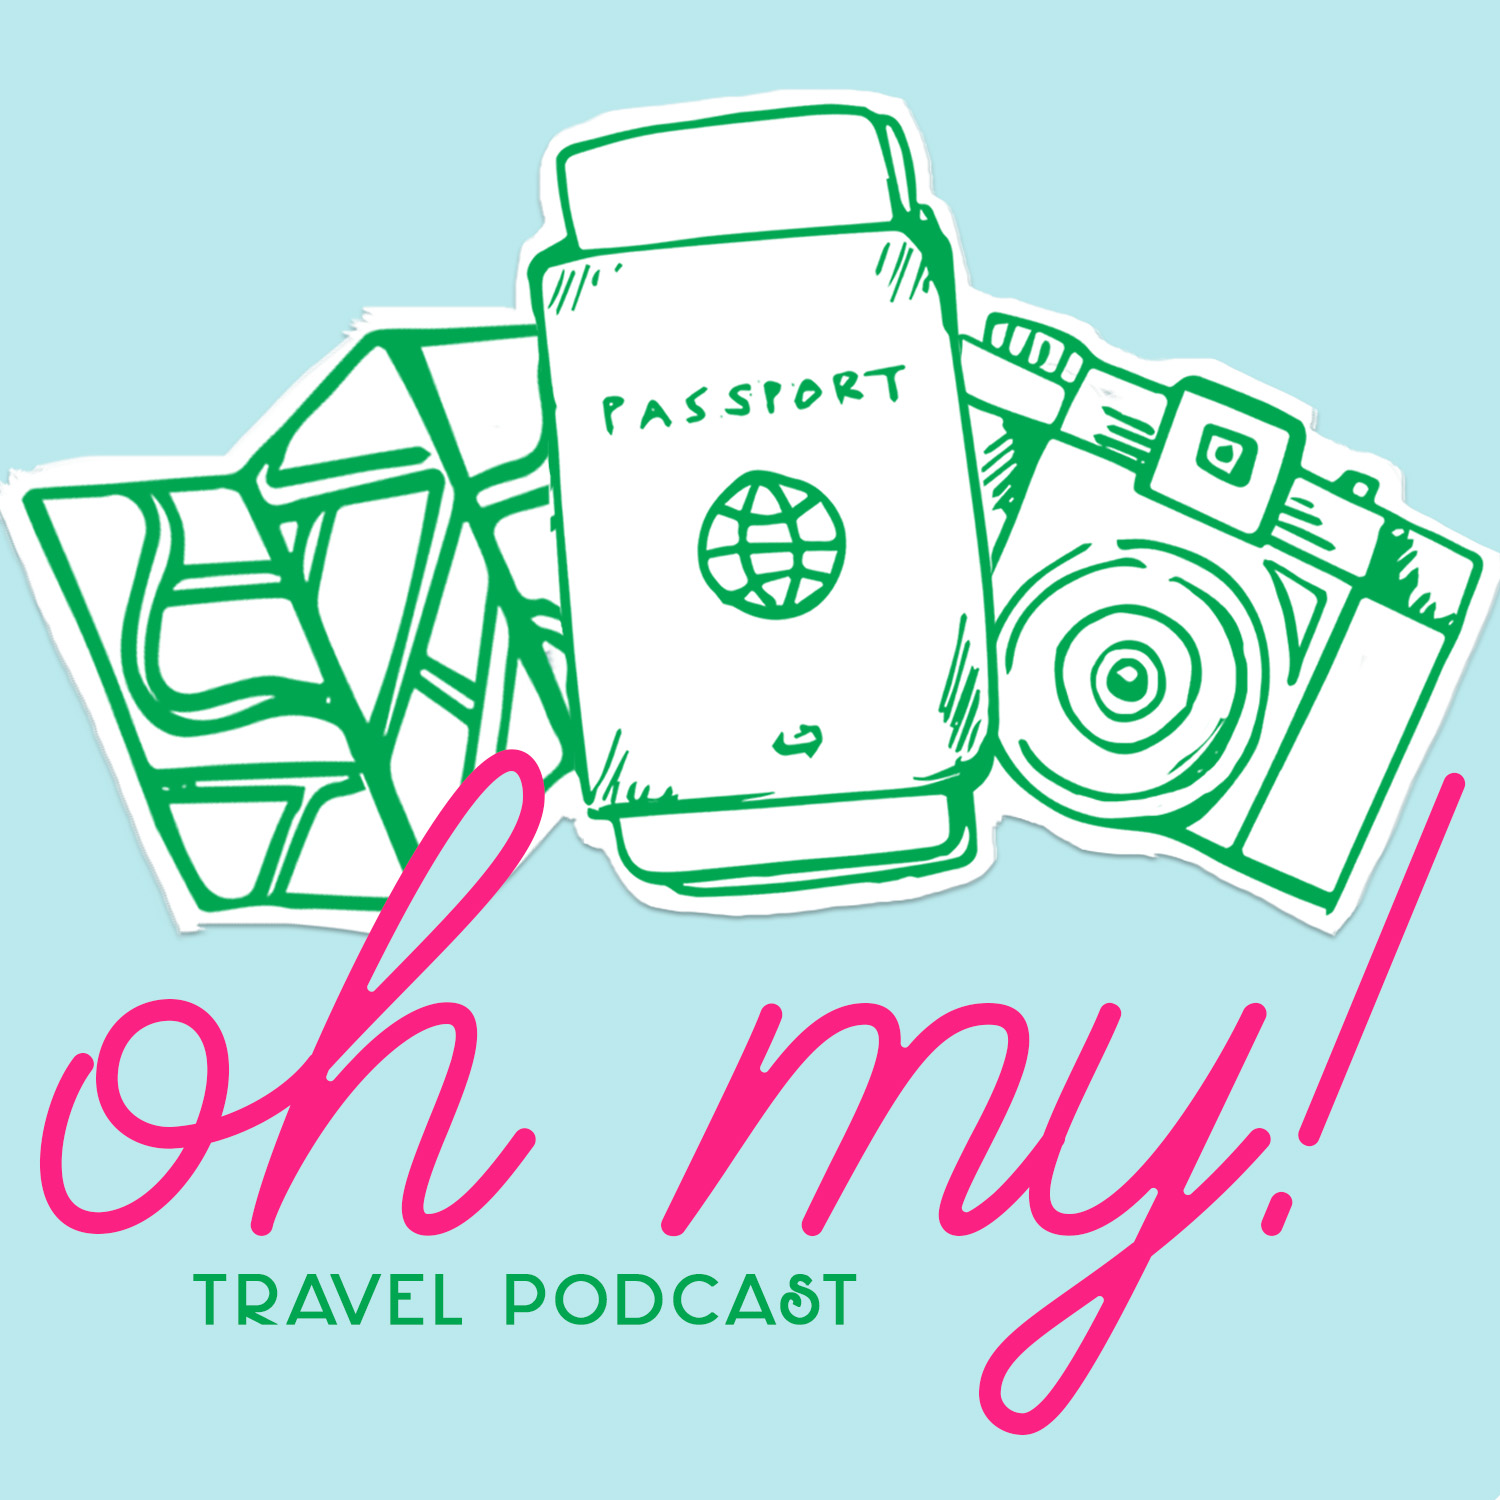 Oh My! Travel Podcast